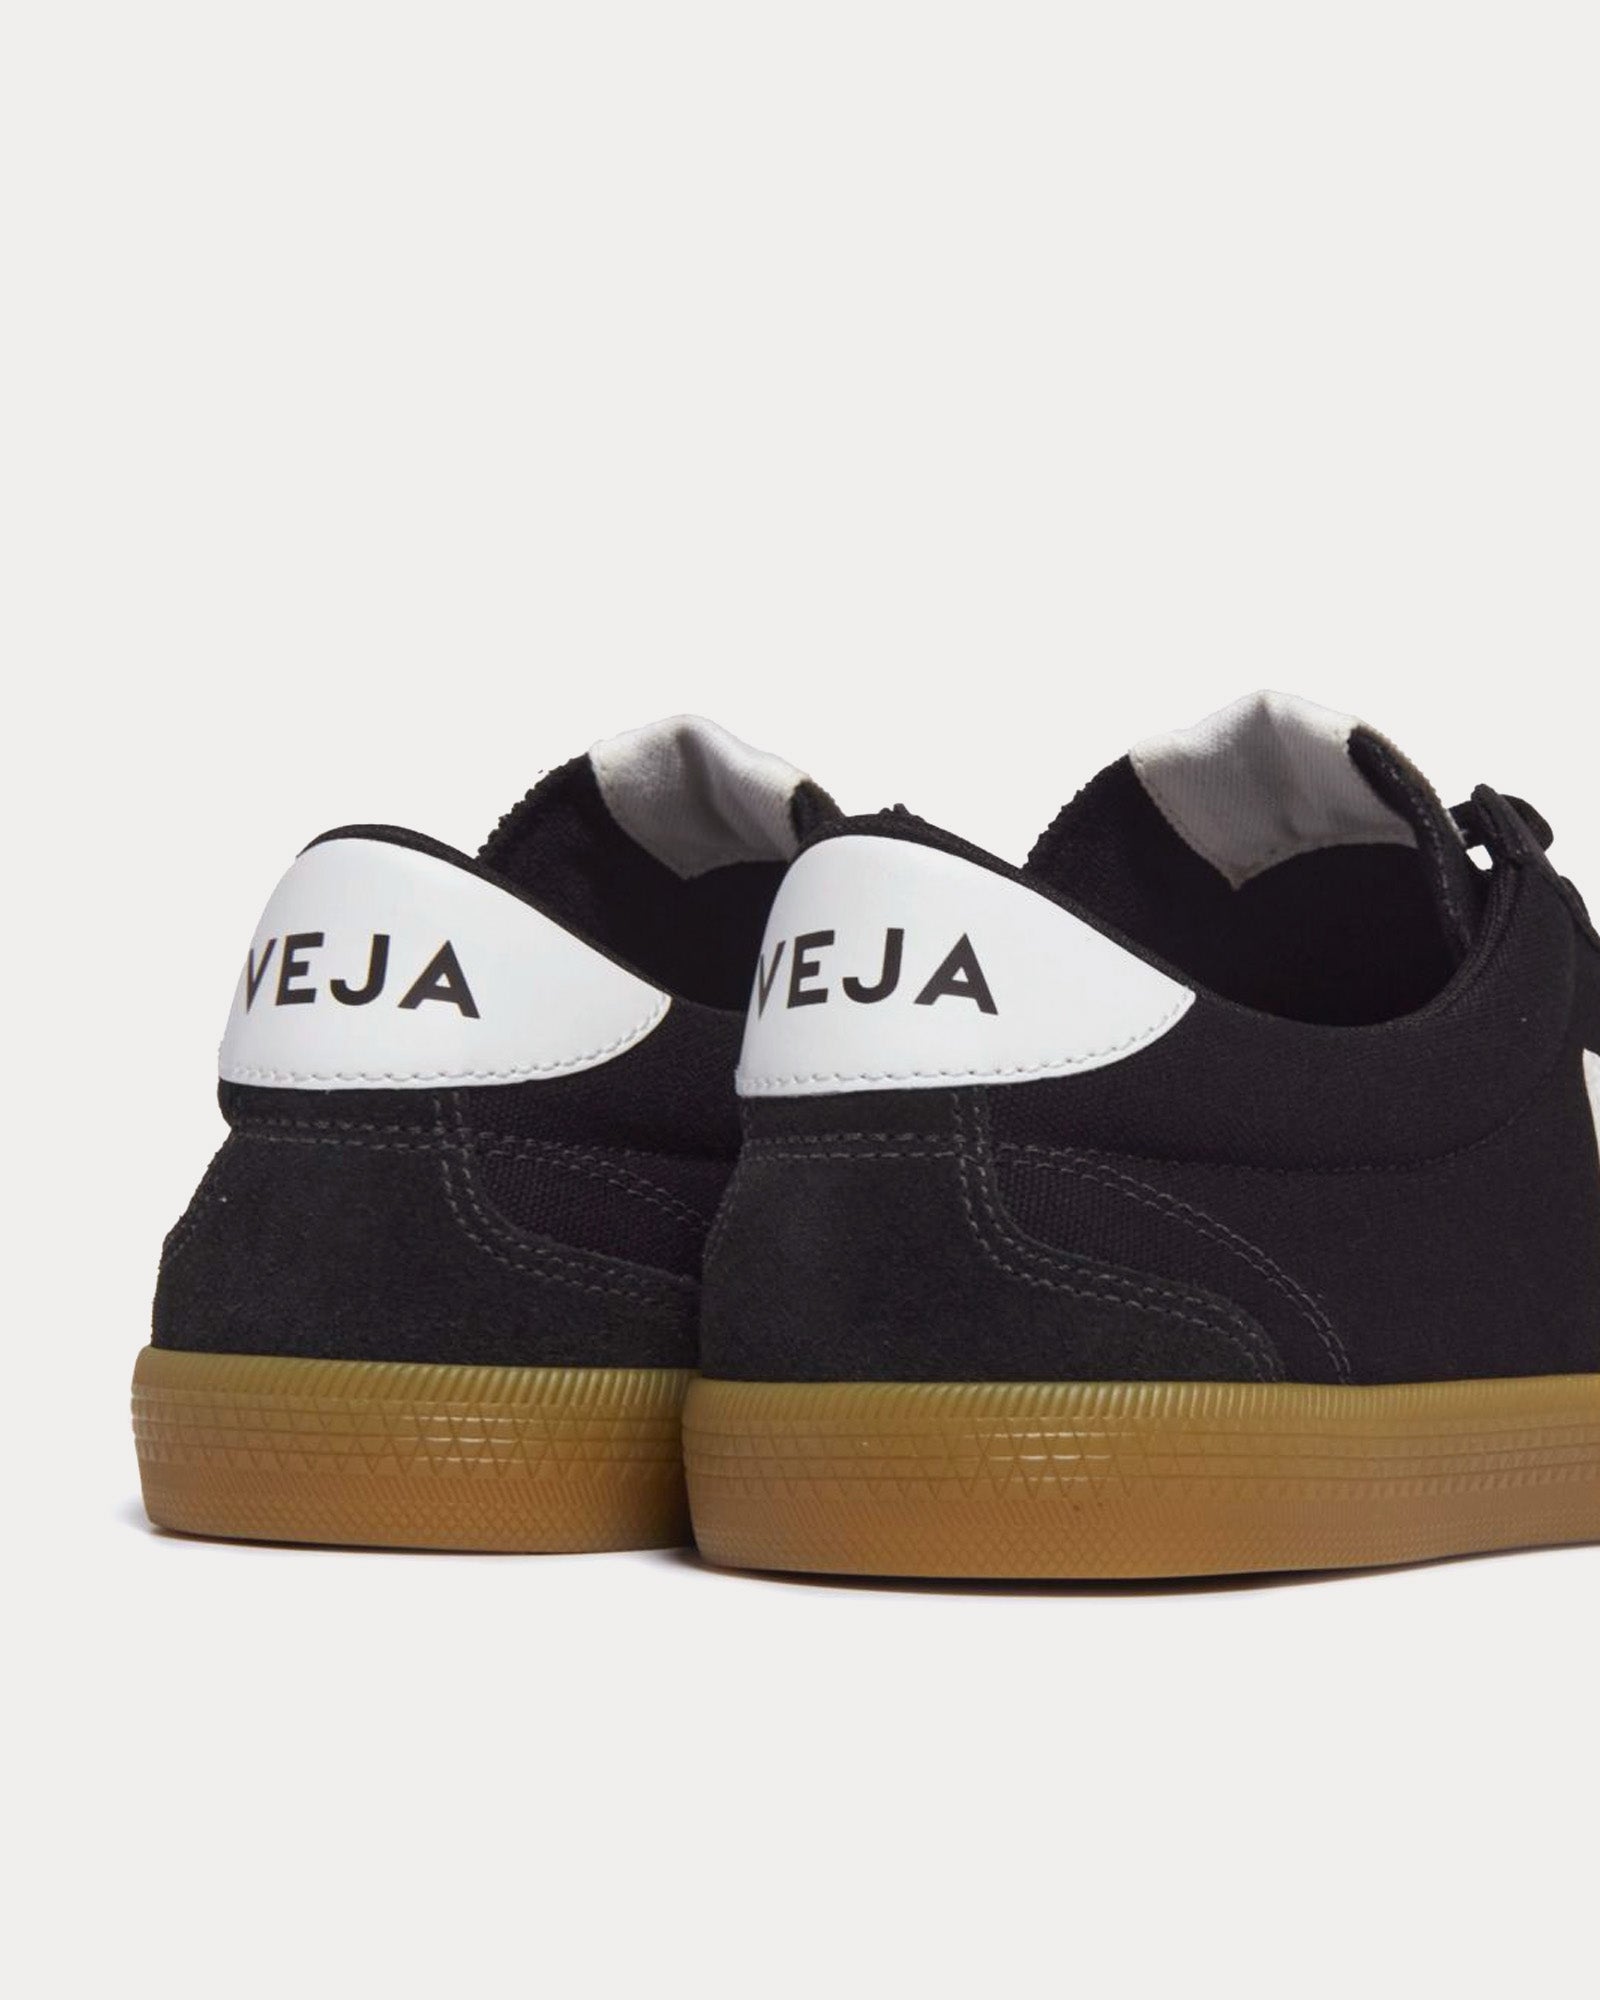 Veja - Volley Canvas Black / White / Natural Low Top Sneakers